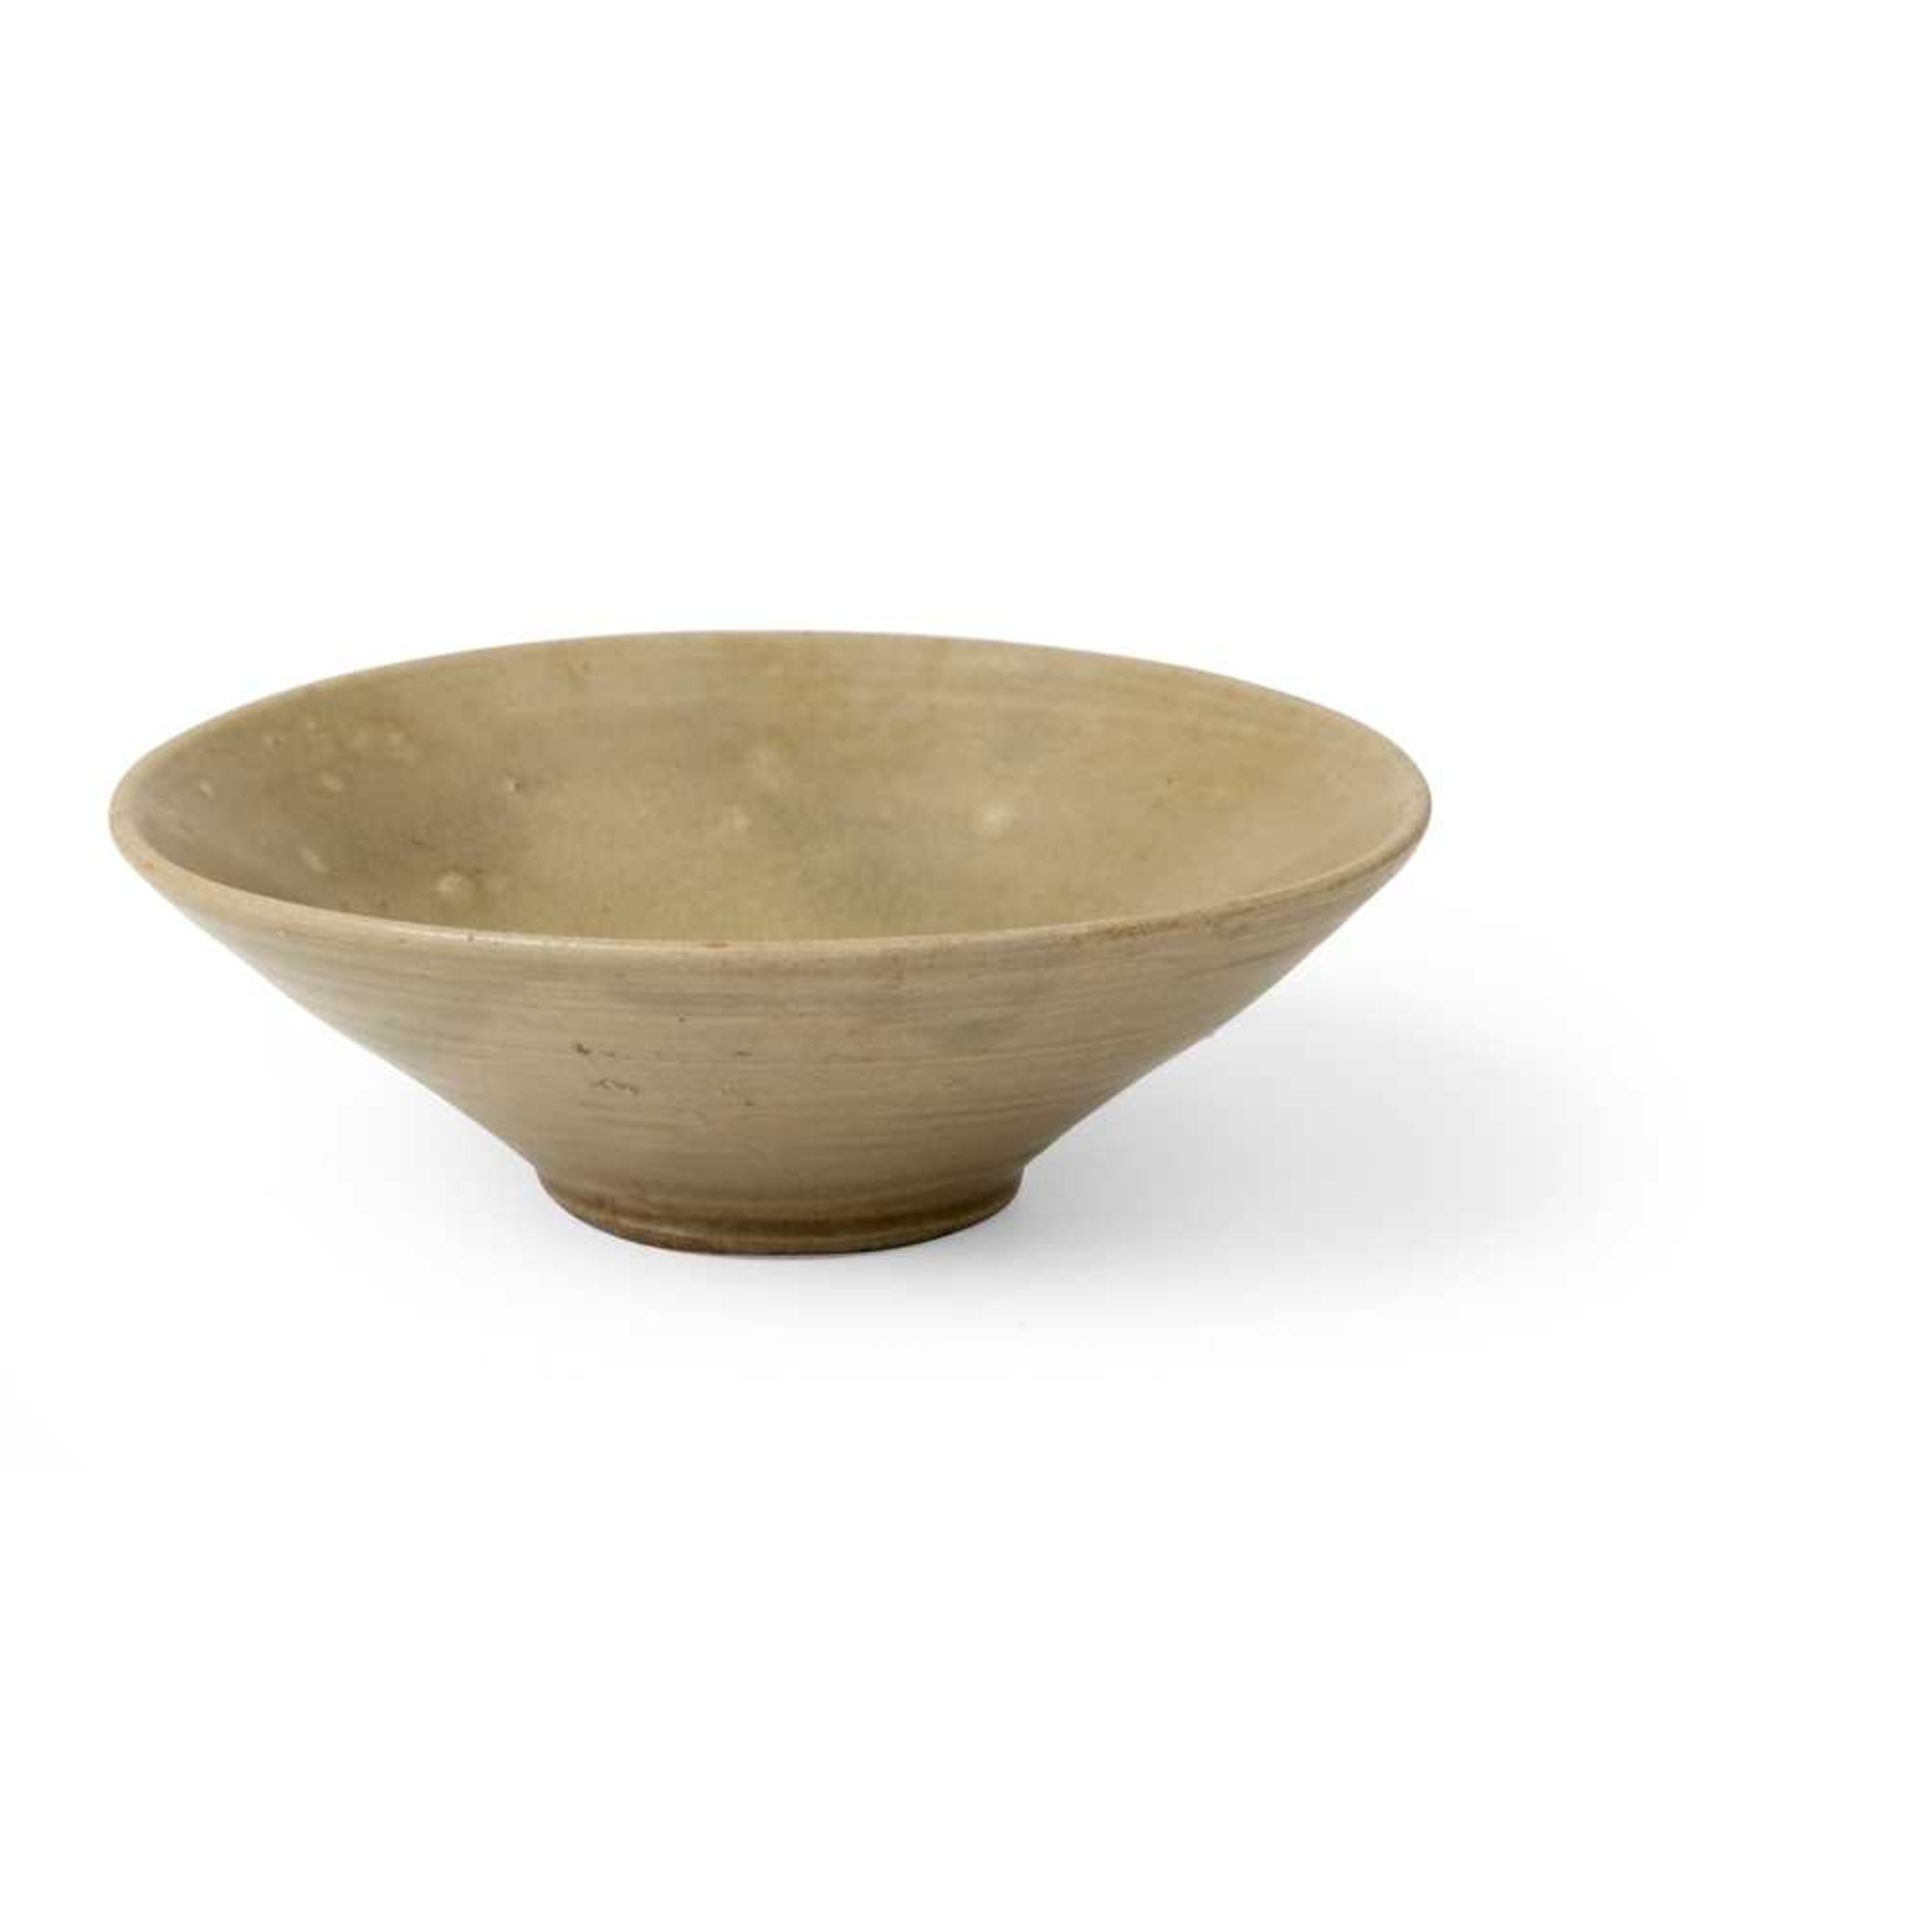 TWO CELADON-GLAZED BOWLS TANG TO YUAN DYNASTY - Image 2 of 10